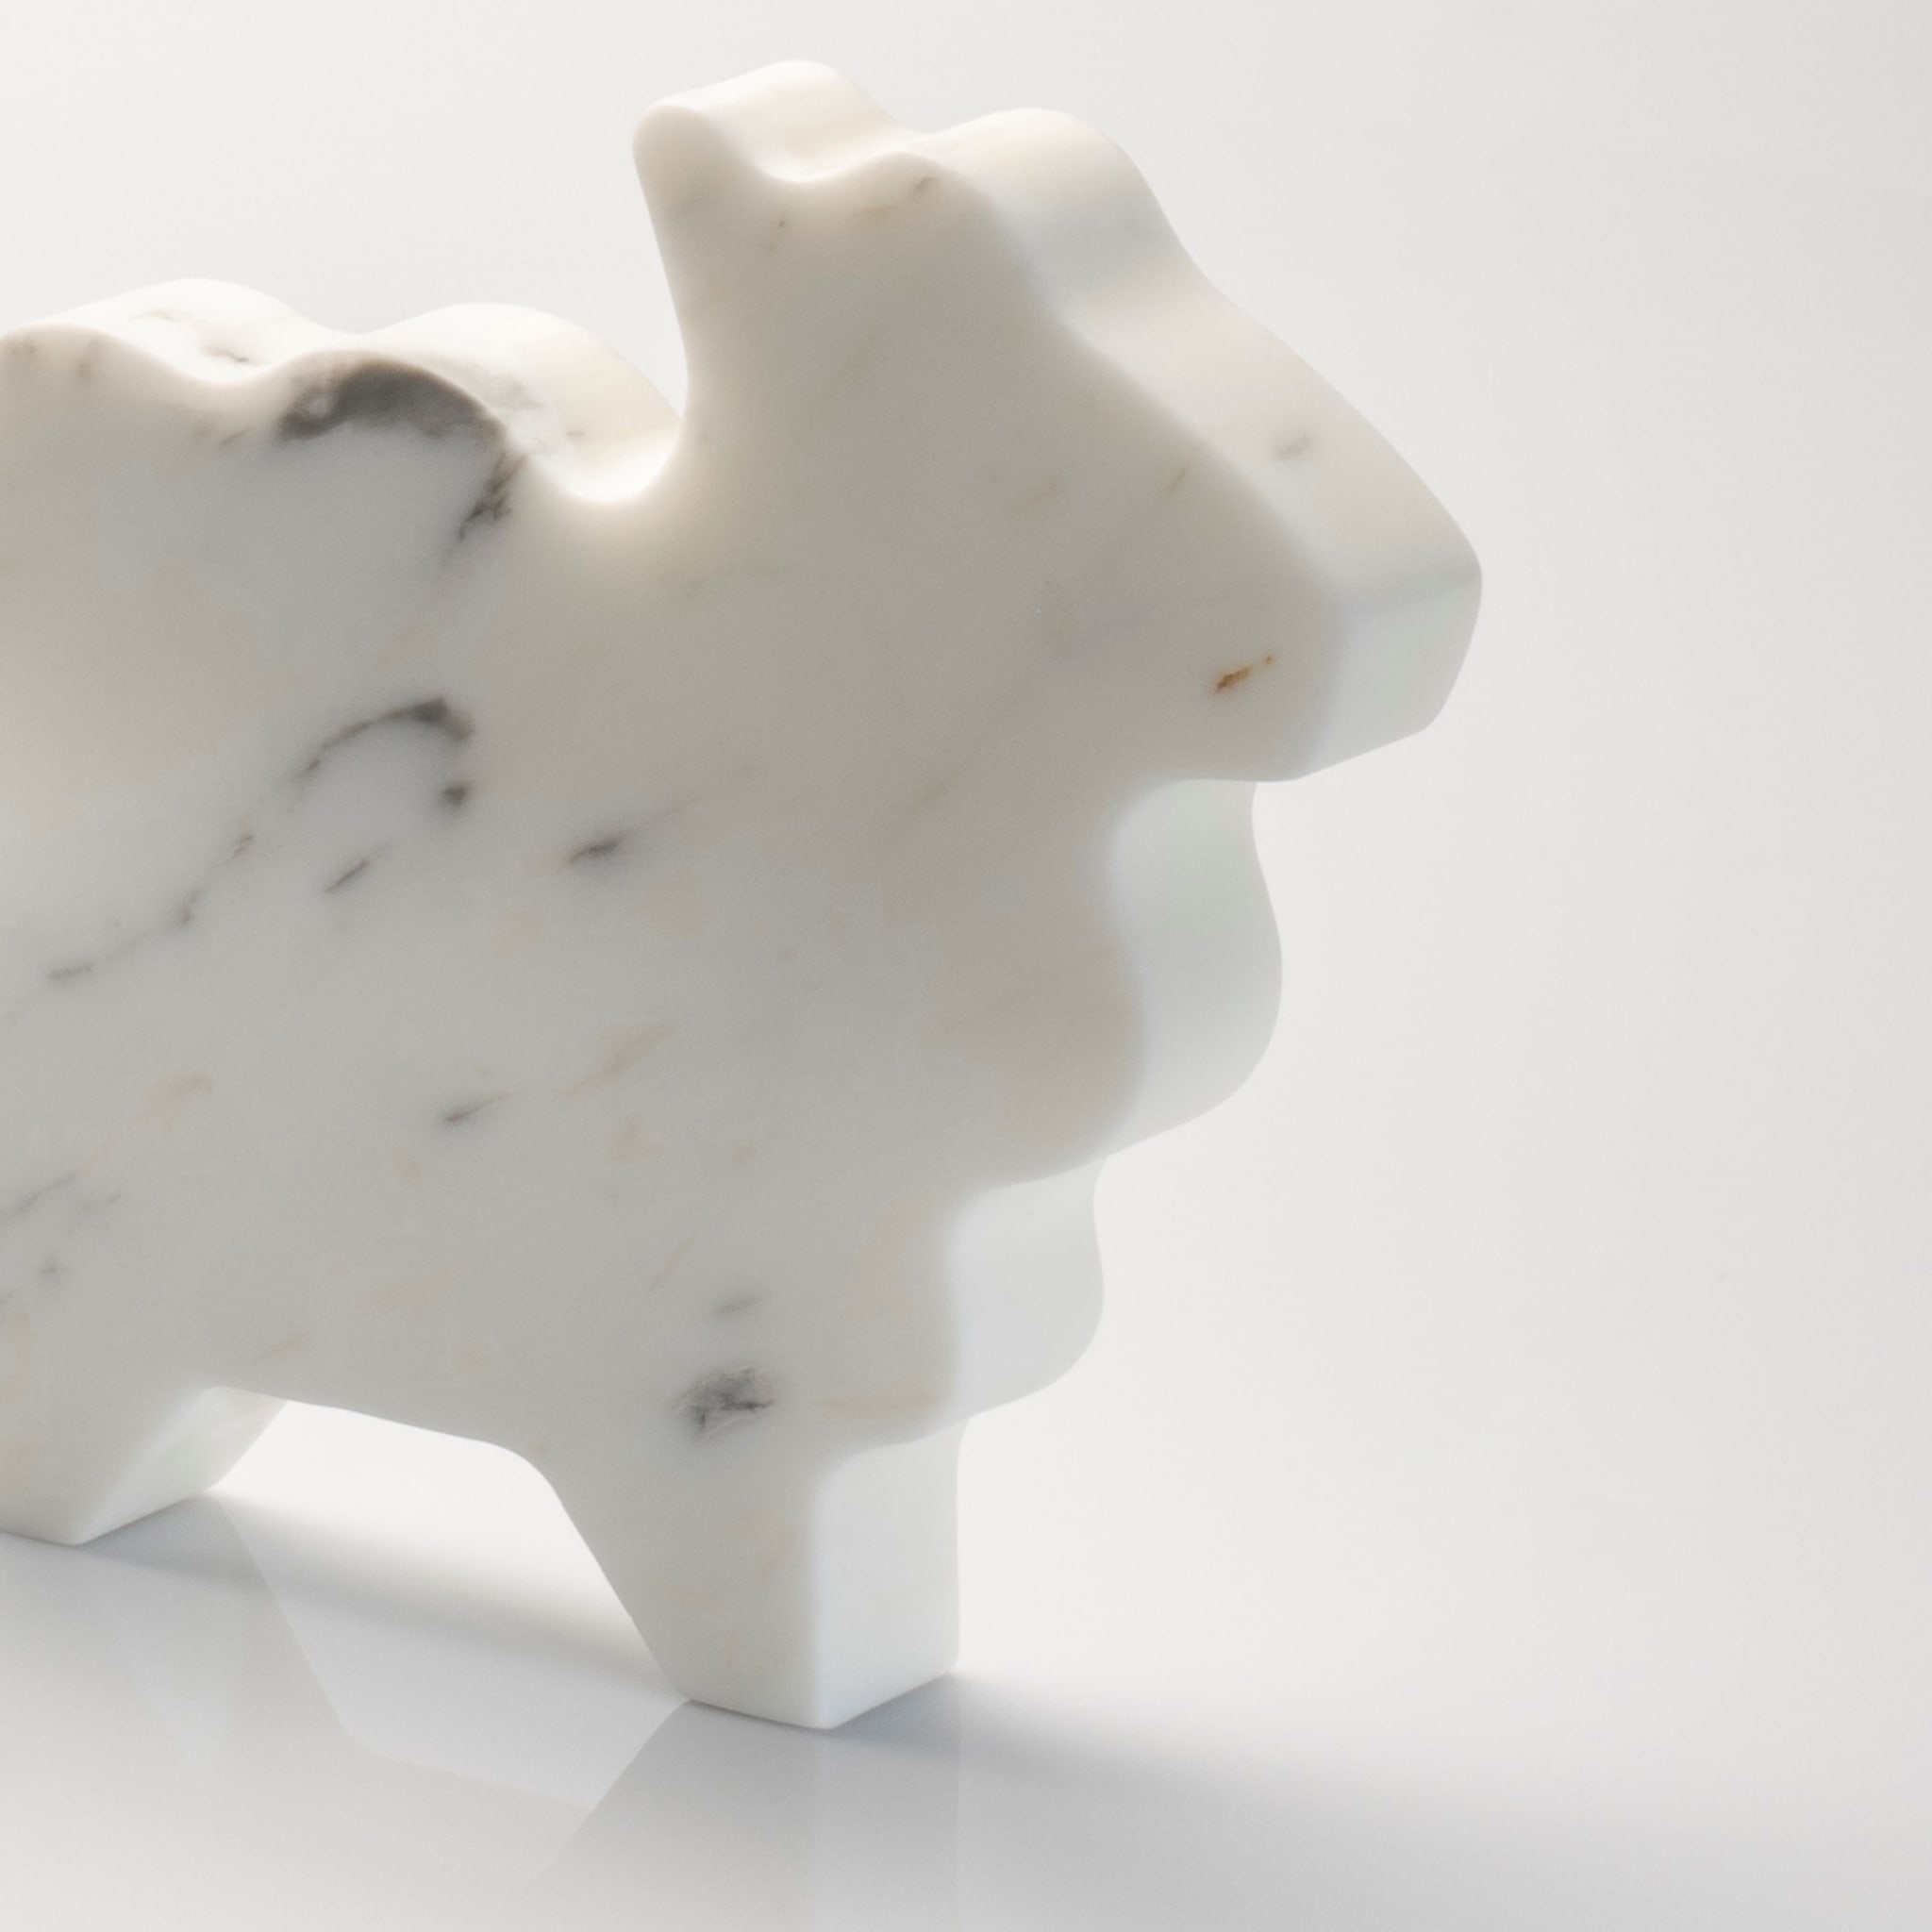 Sheep Large White Statuette by Alessandra Grasso - Alternative view 2